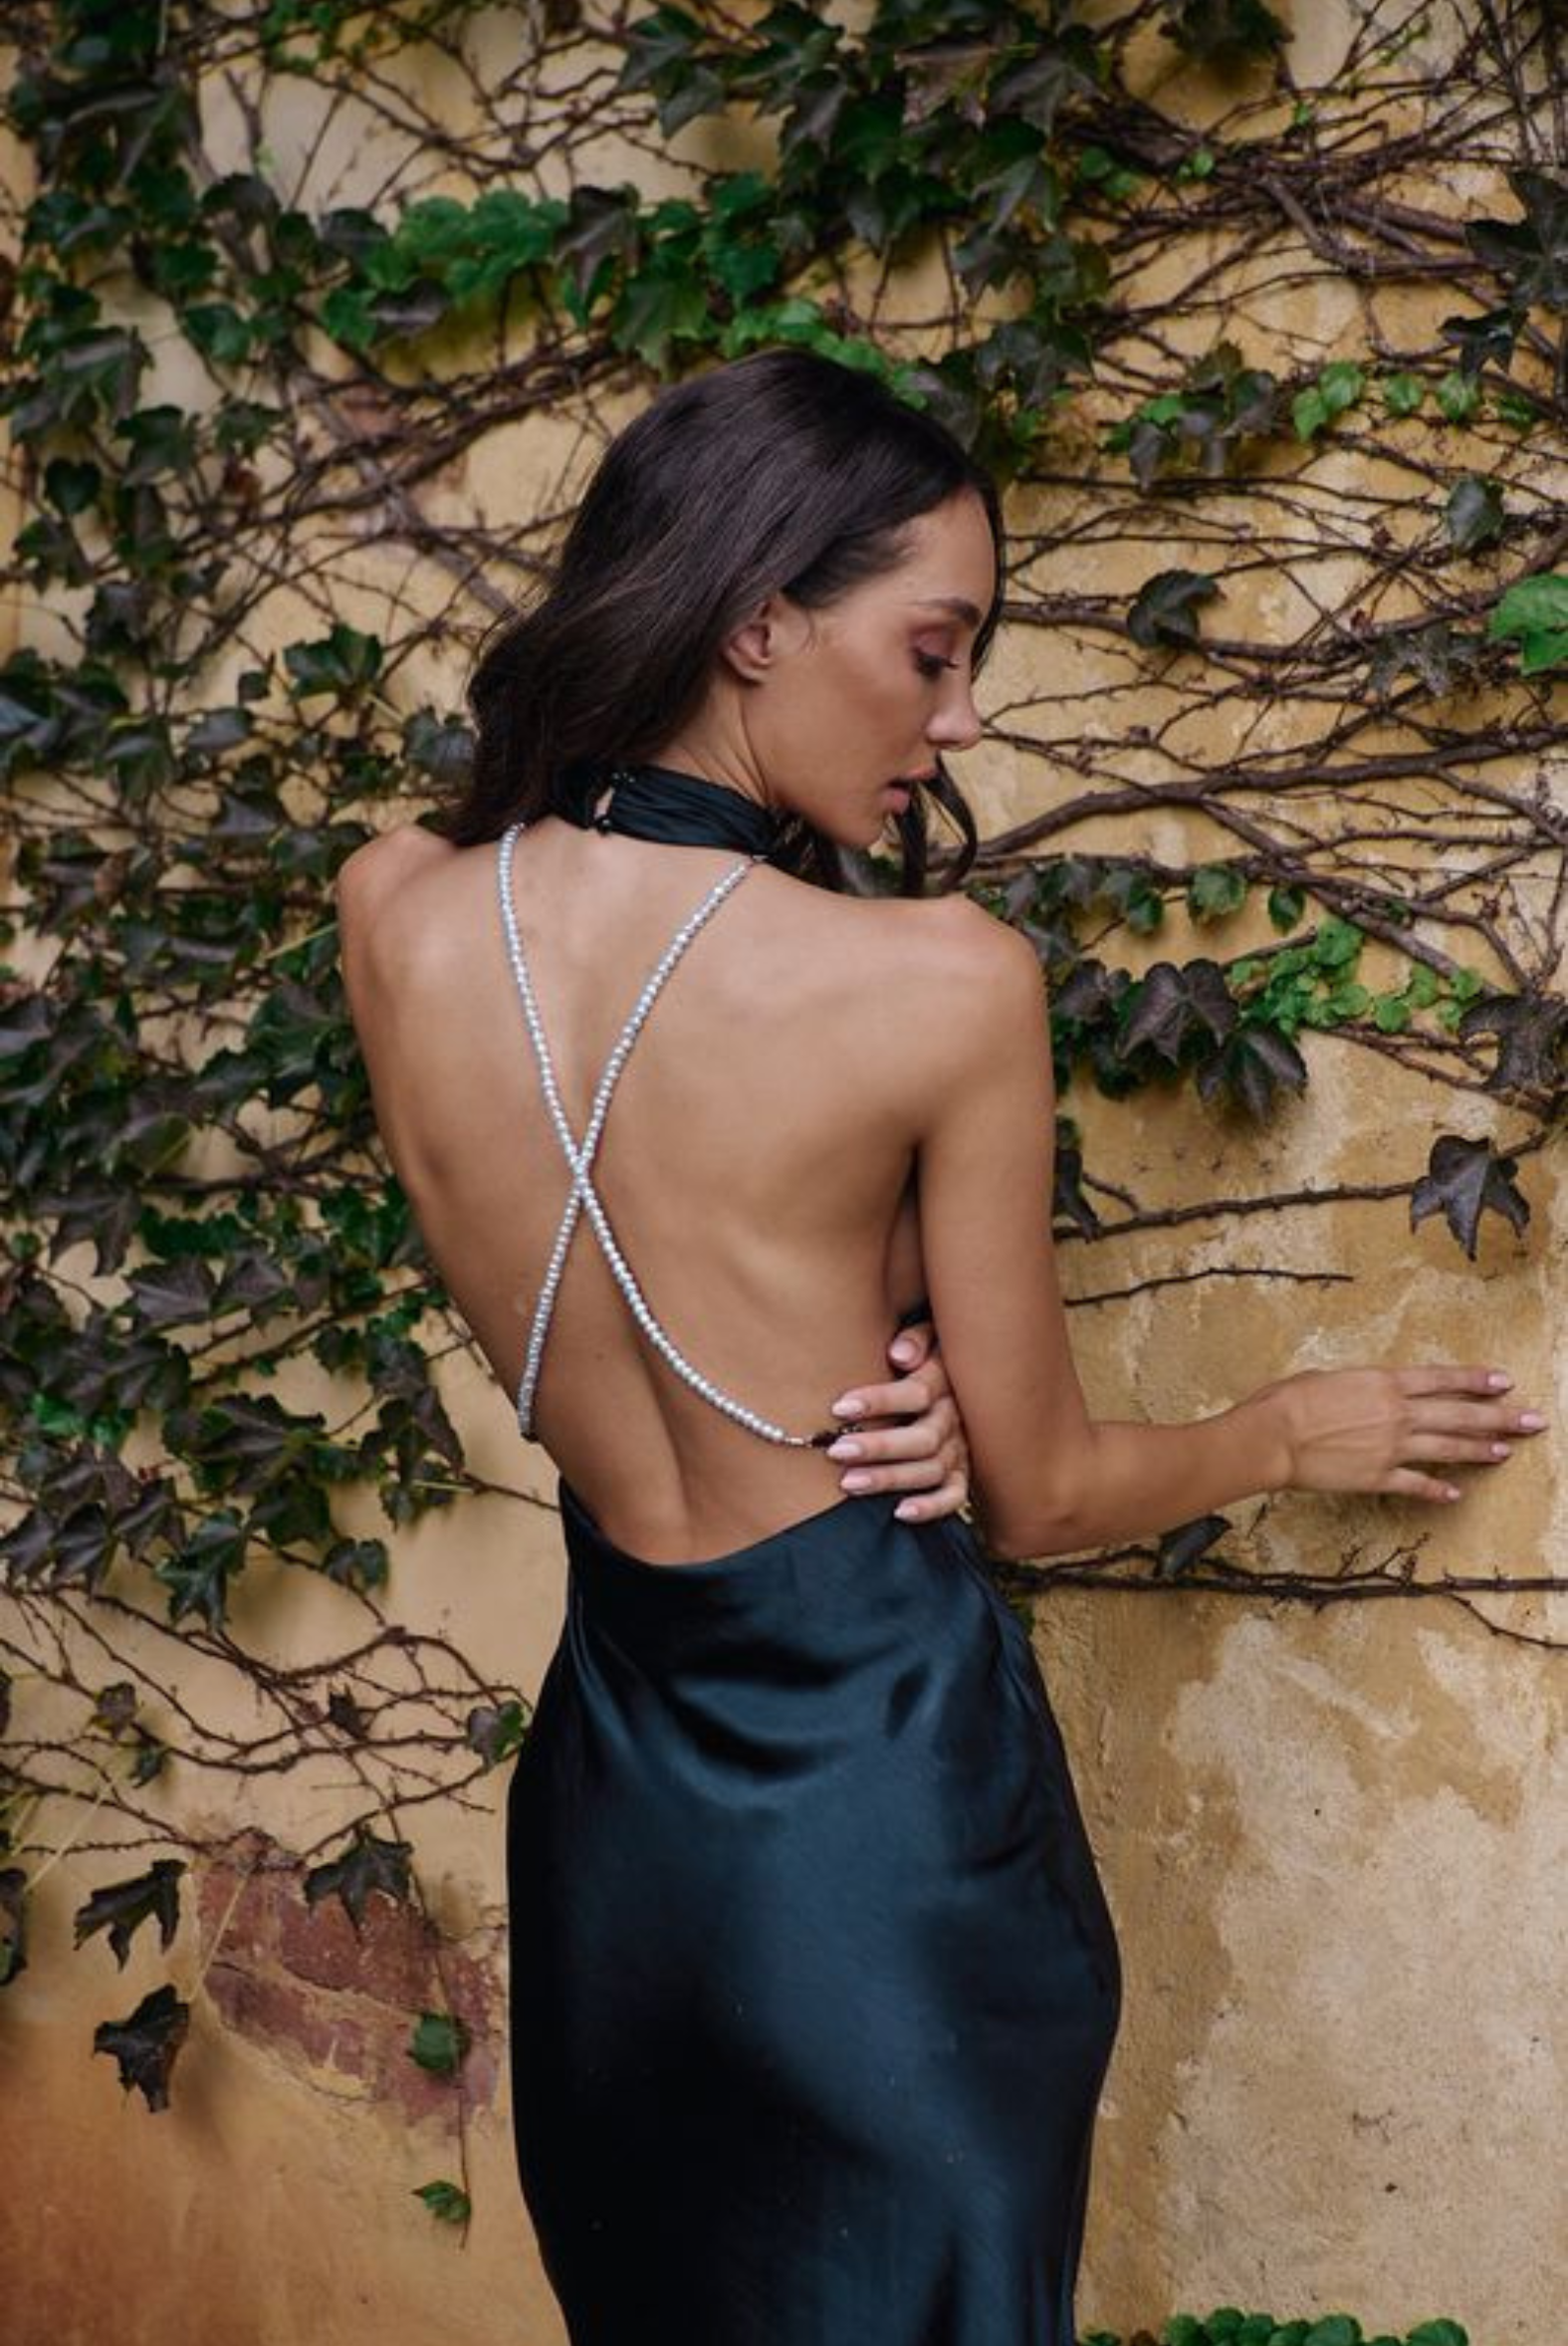 Consider the Backless Dress for a New Year's Eve at Home | Vogue